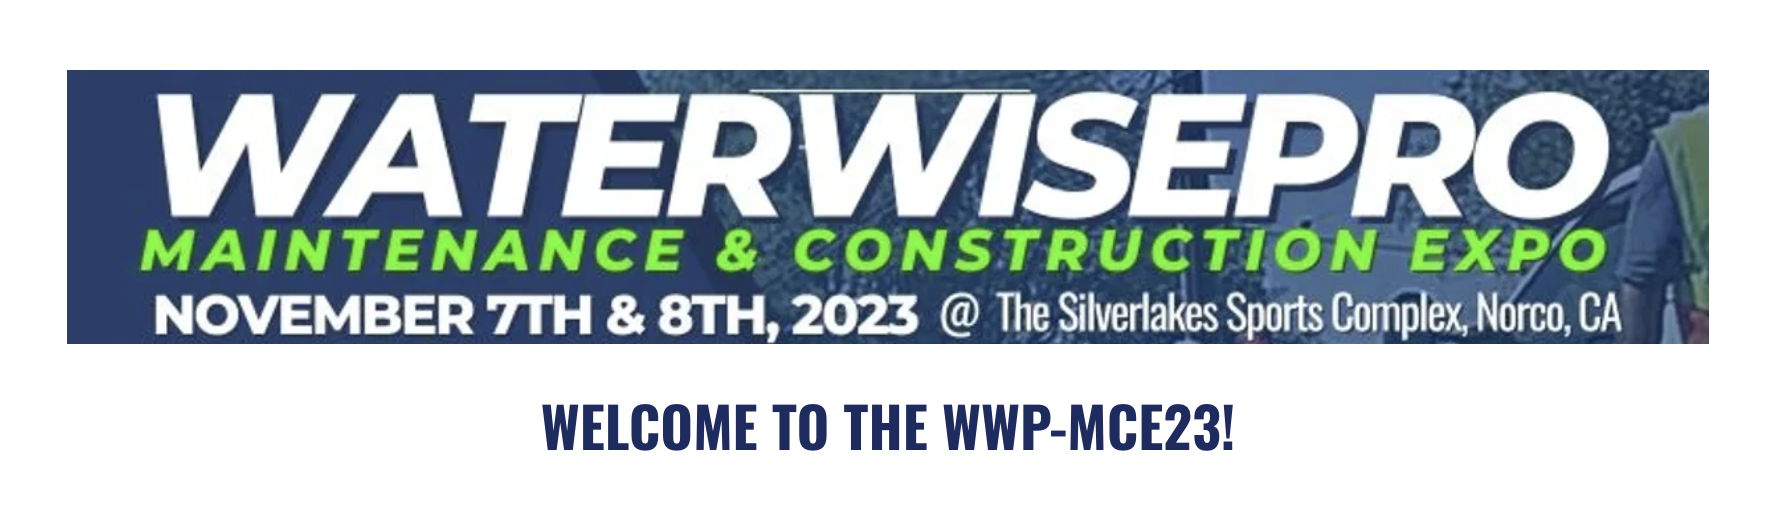 Conference banner for Water Wise Pro Maintenance and Construction Expo 2023